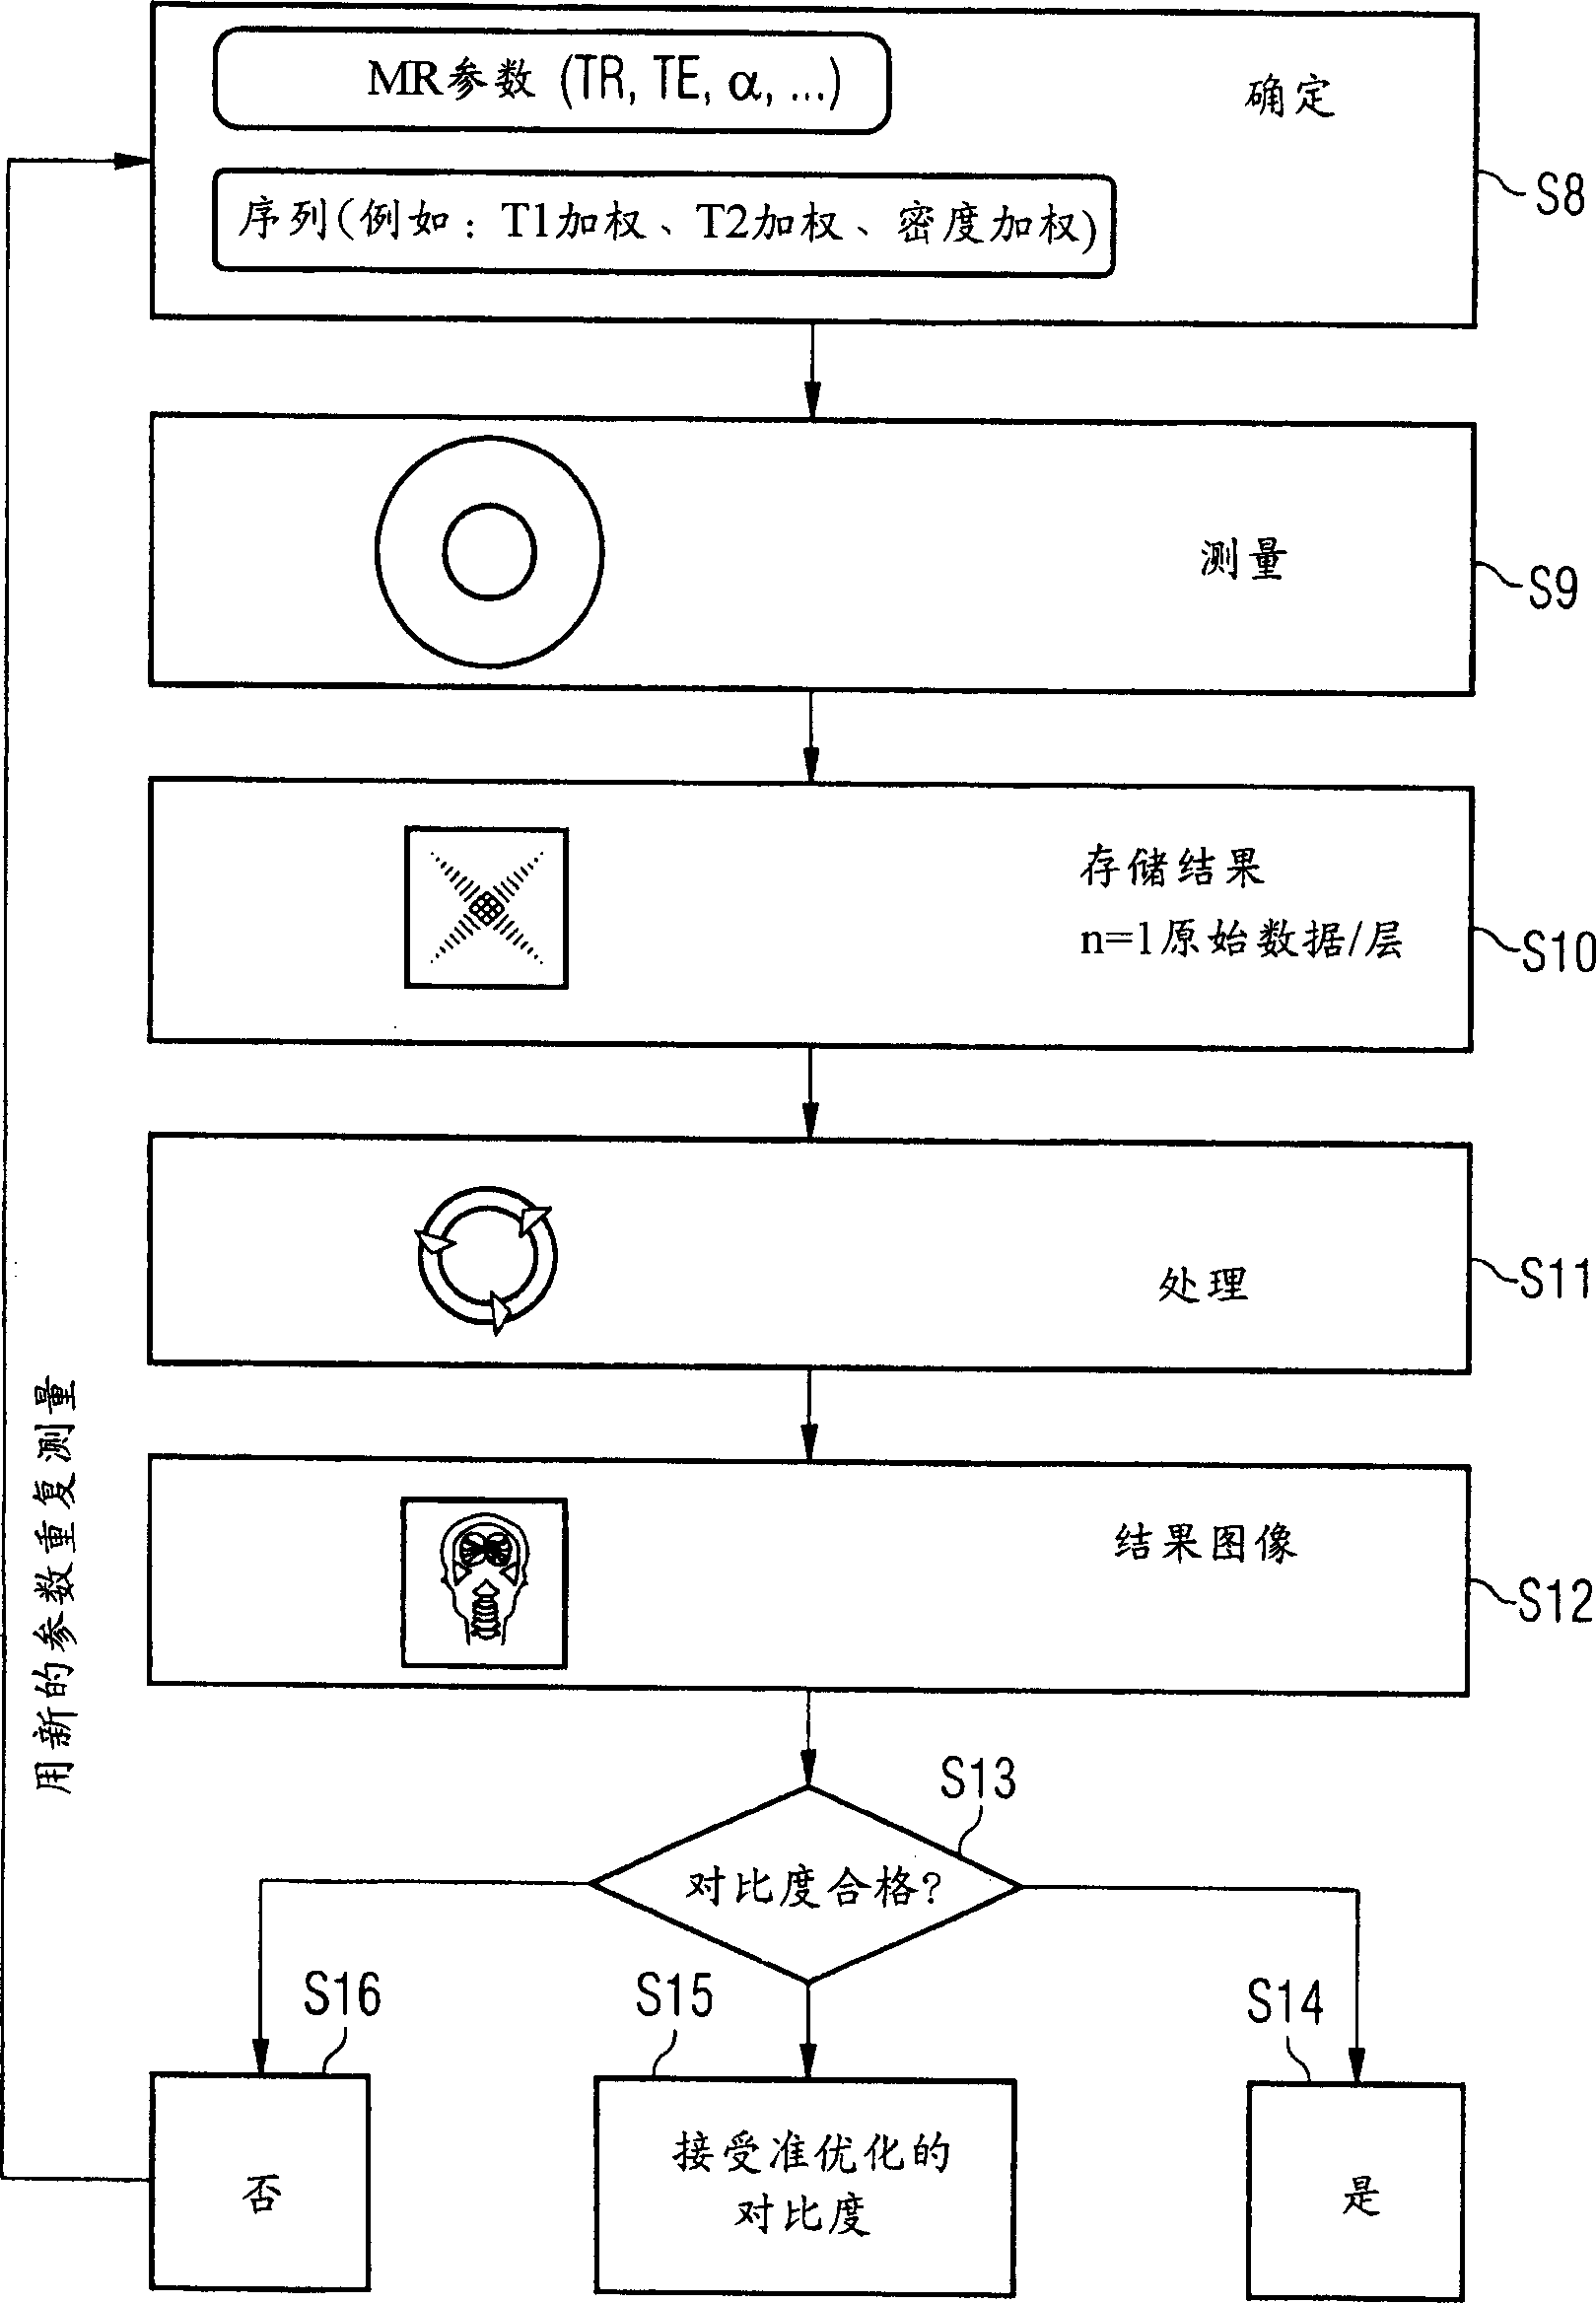 Method and apparatus for magnetic resonance image forming utilizing interactive contrast optimization